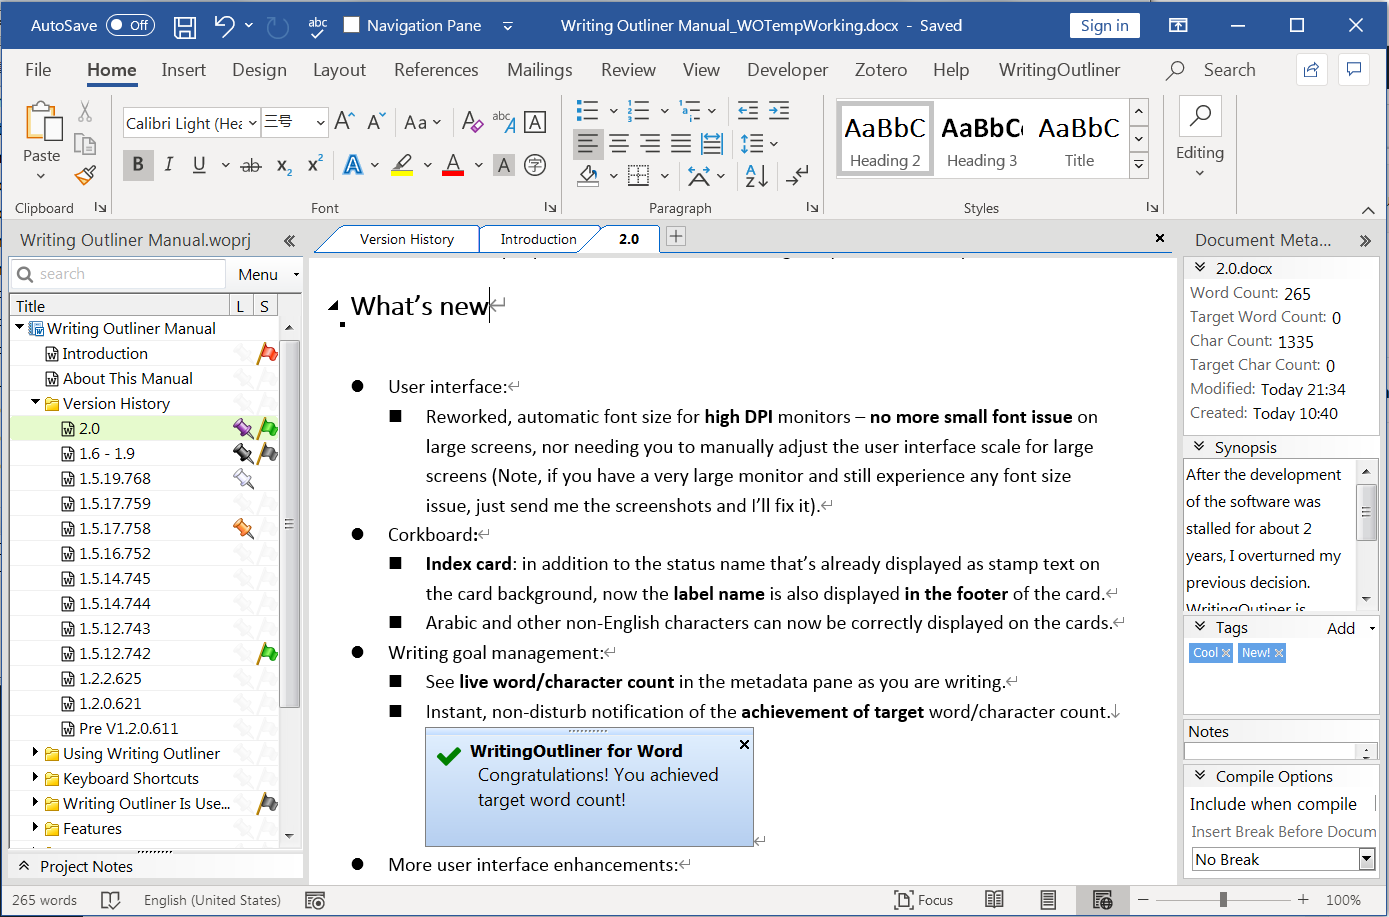 Writing Outliner for MS Word